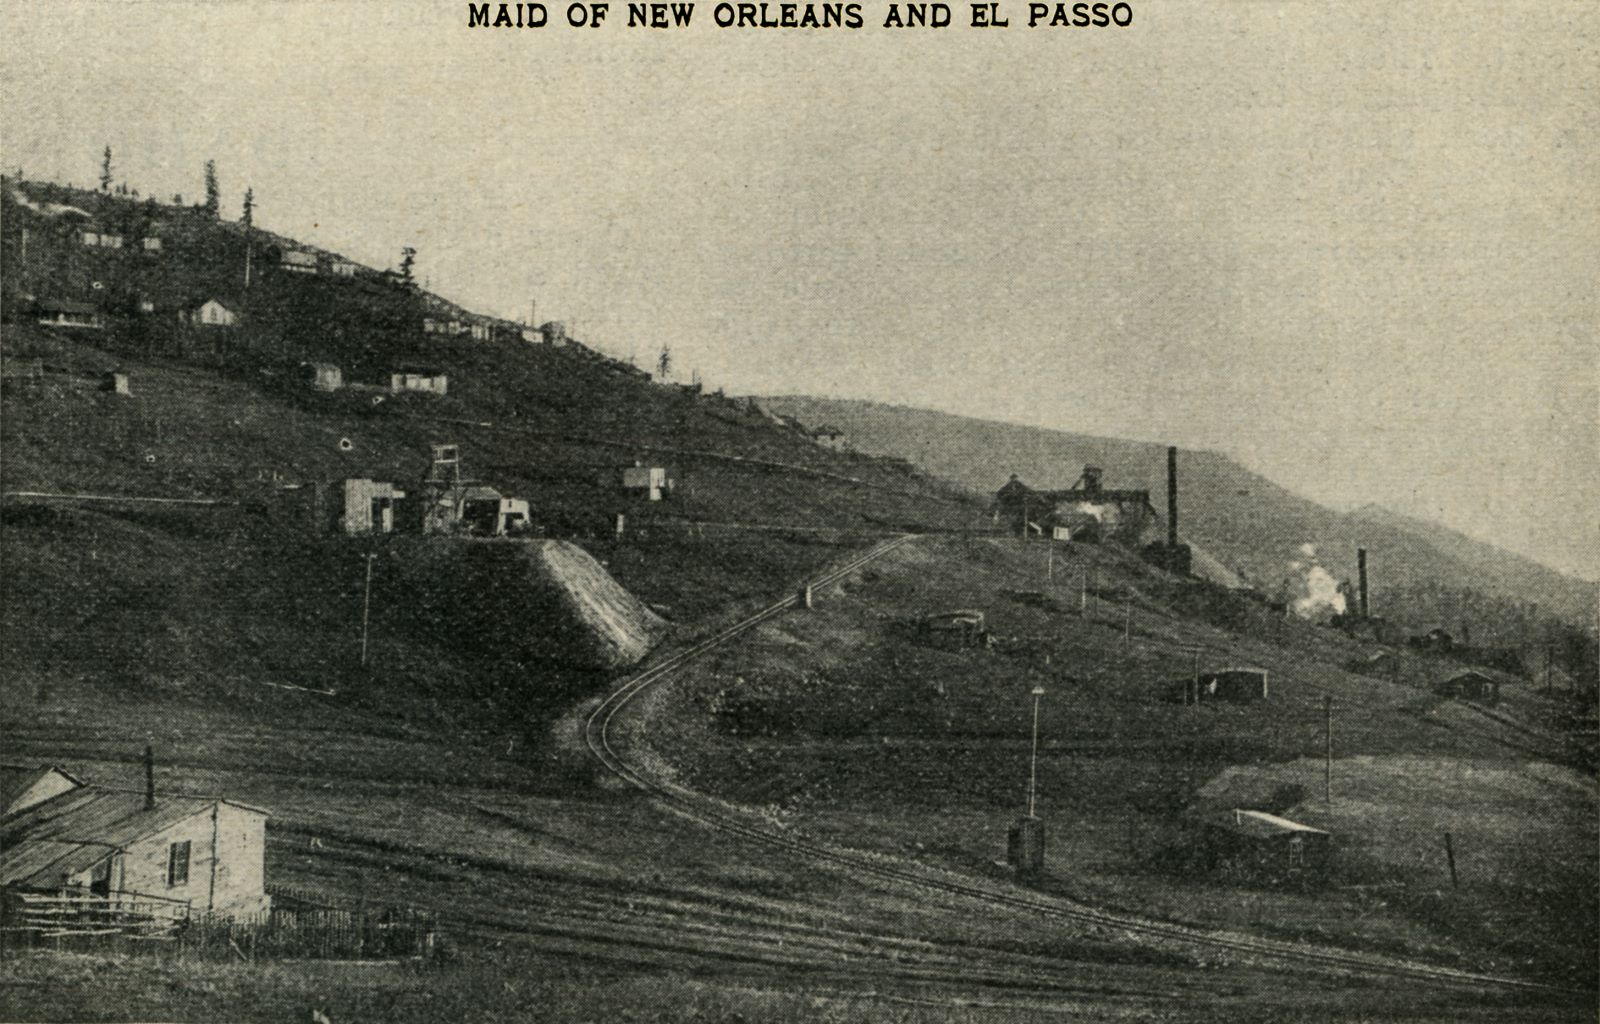 Maid of New Orleans and El Paso